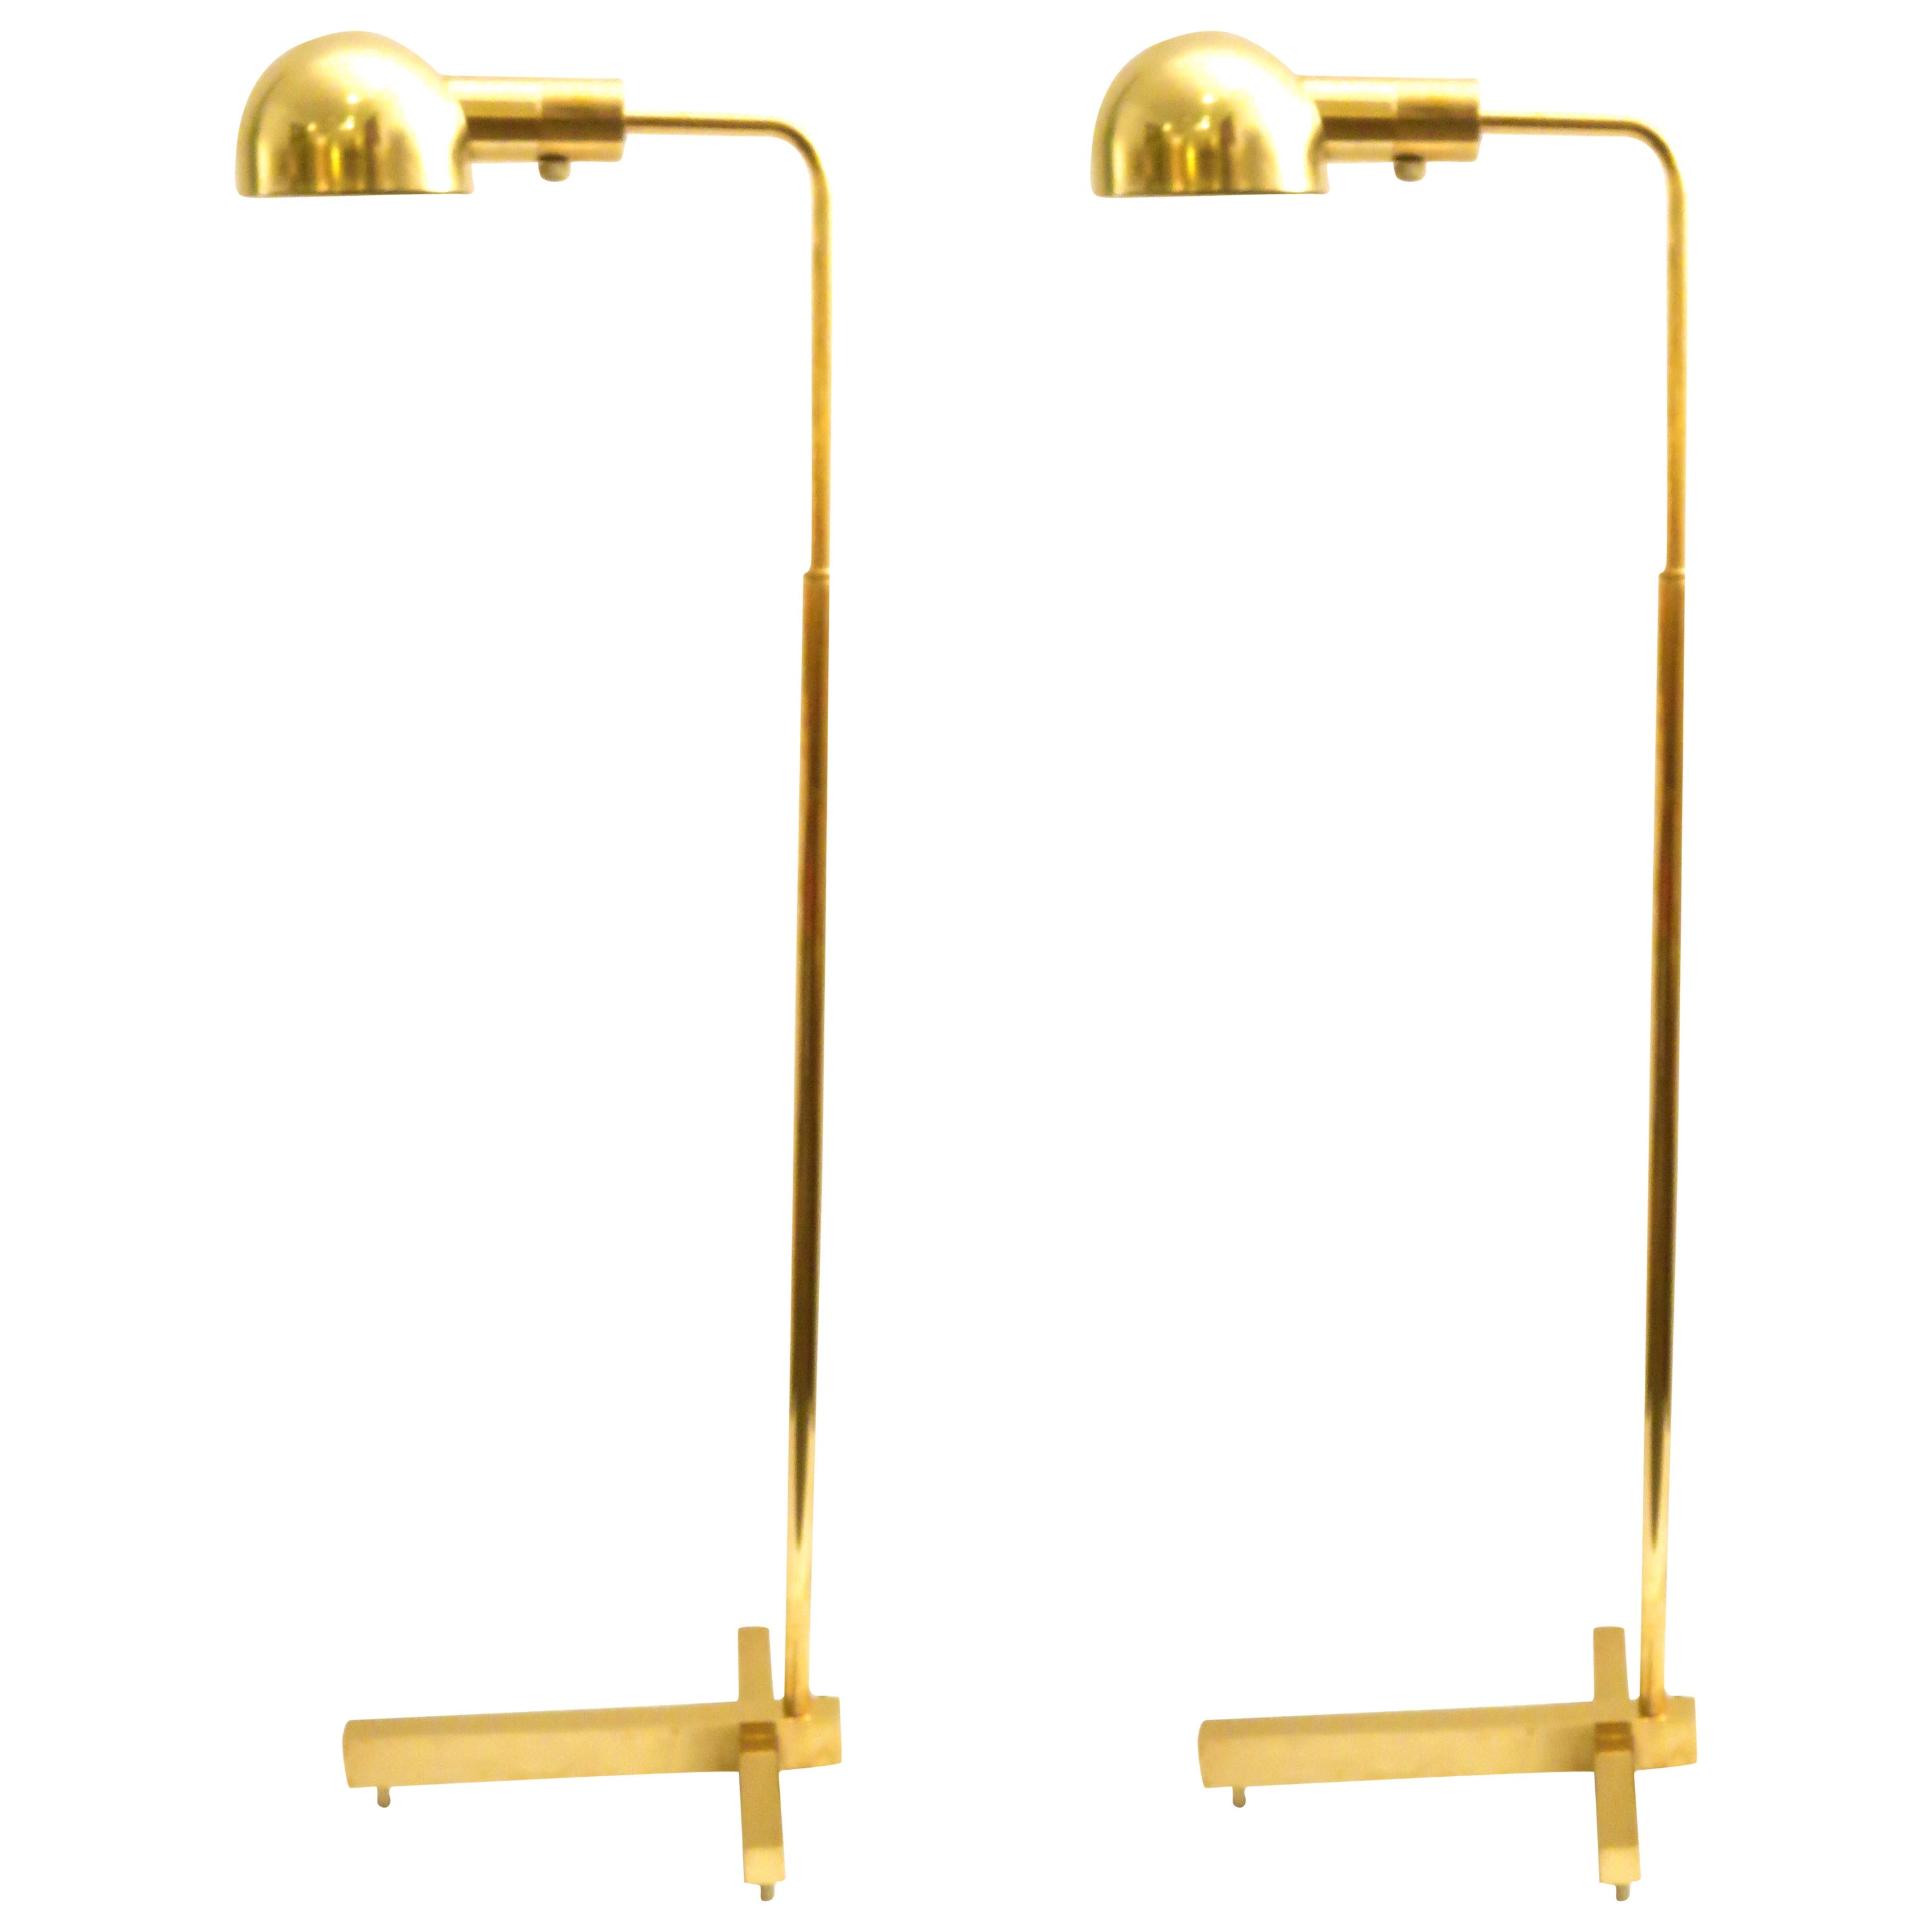 1970s Pair of multidirectional floor lamps in brass by Casella lighting